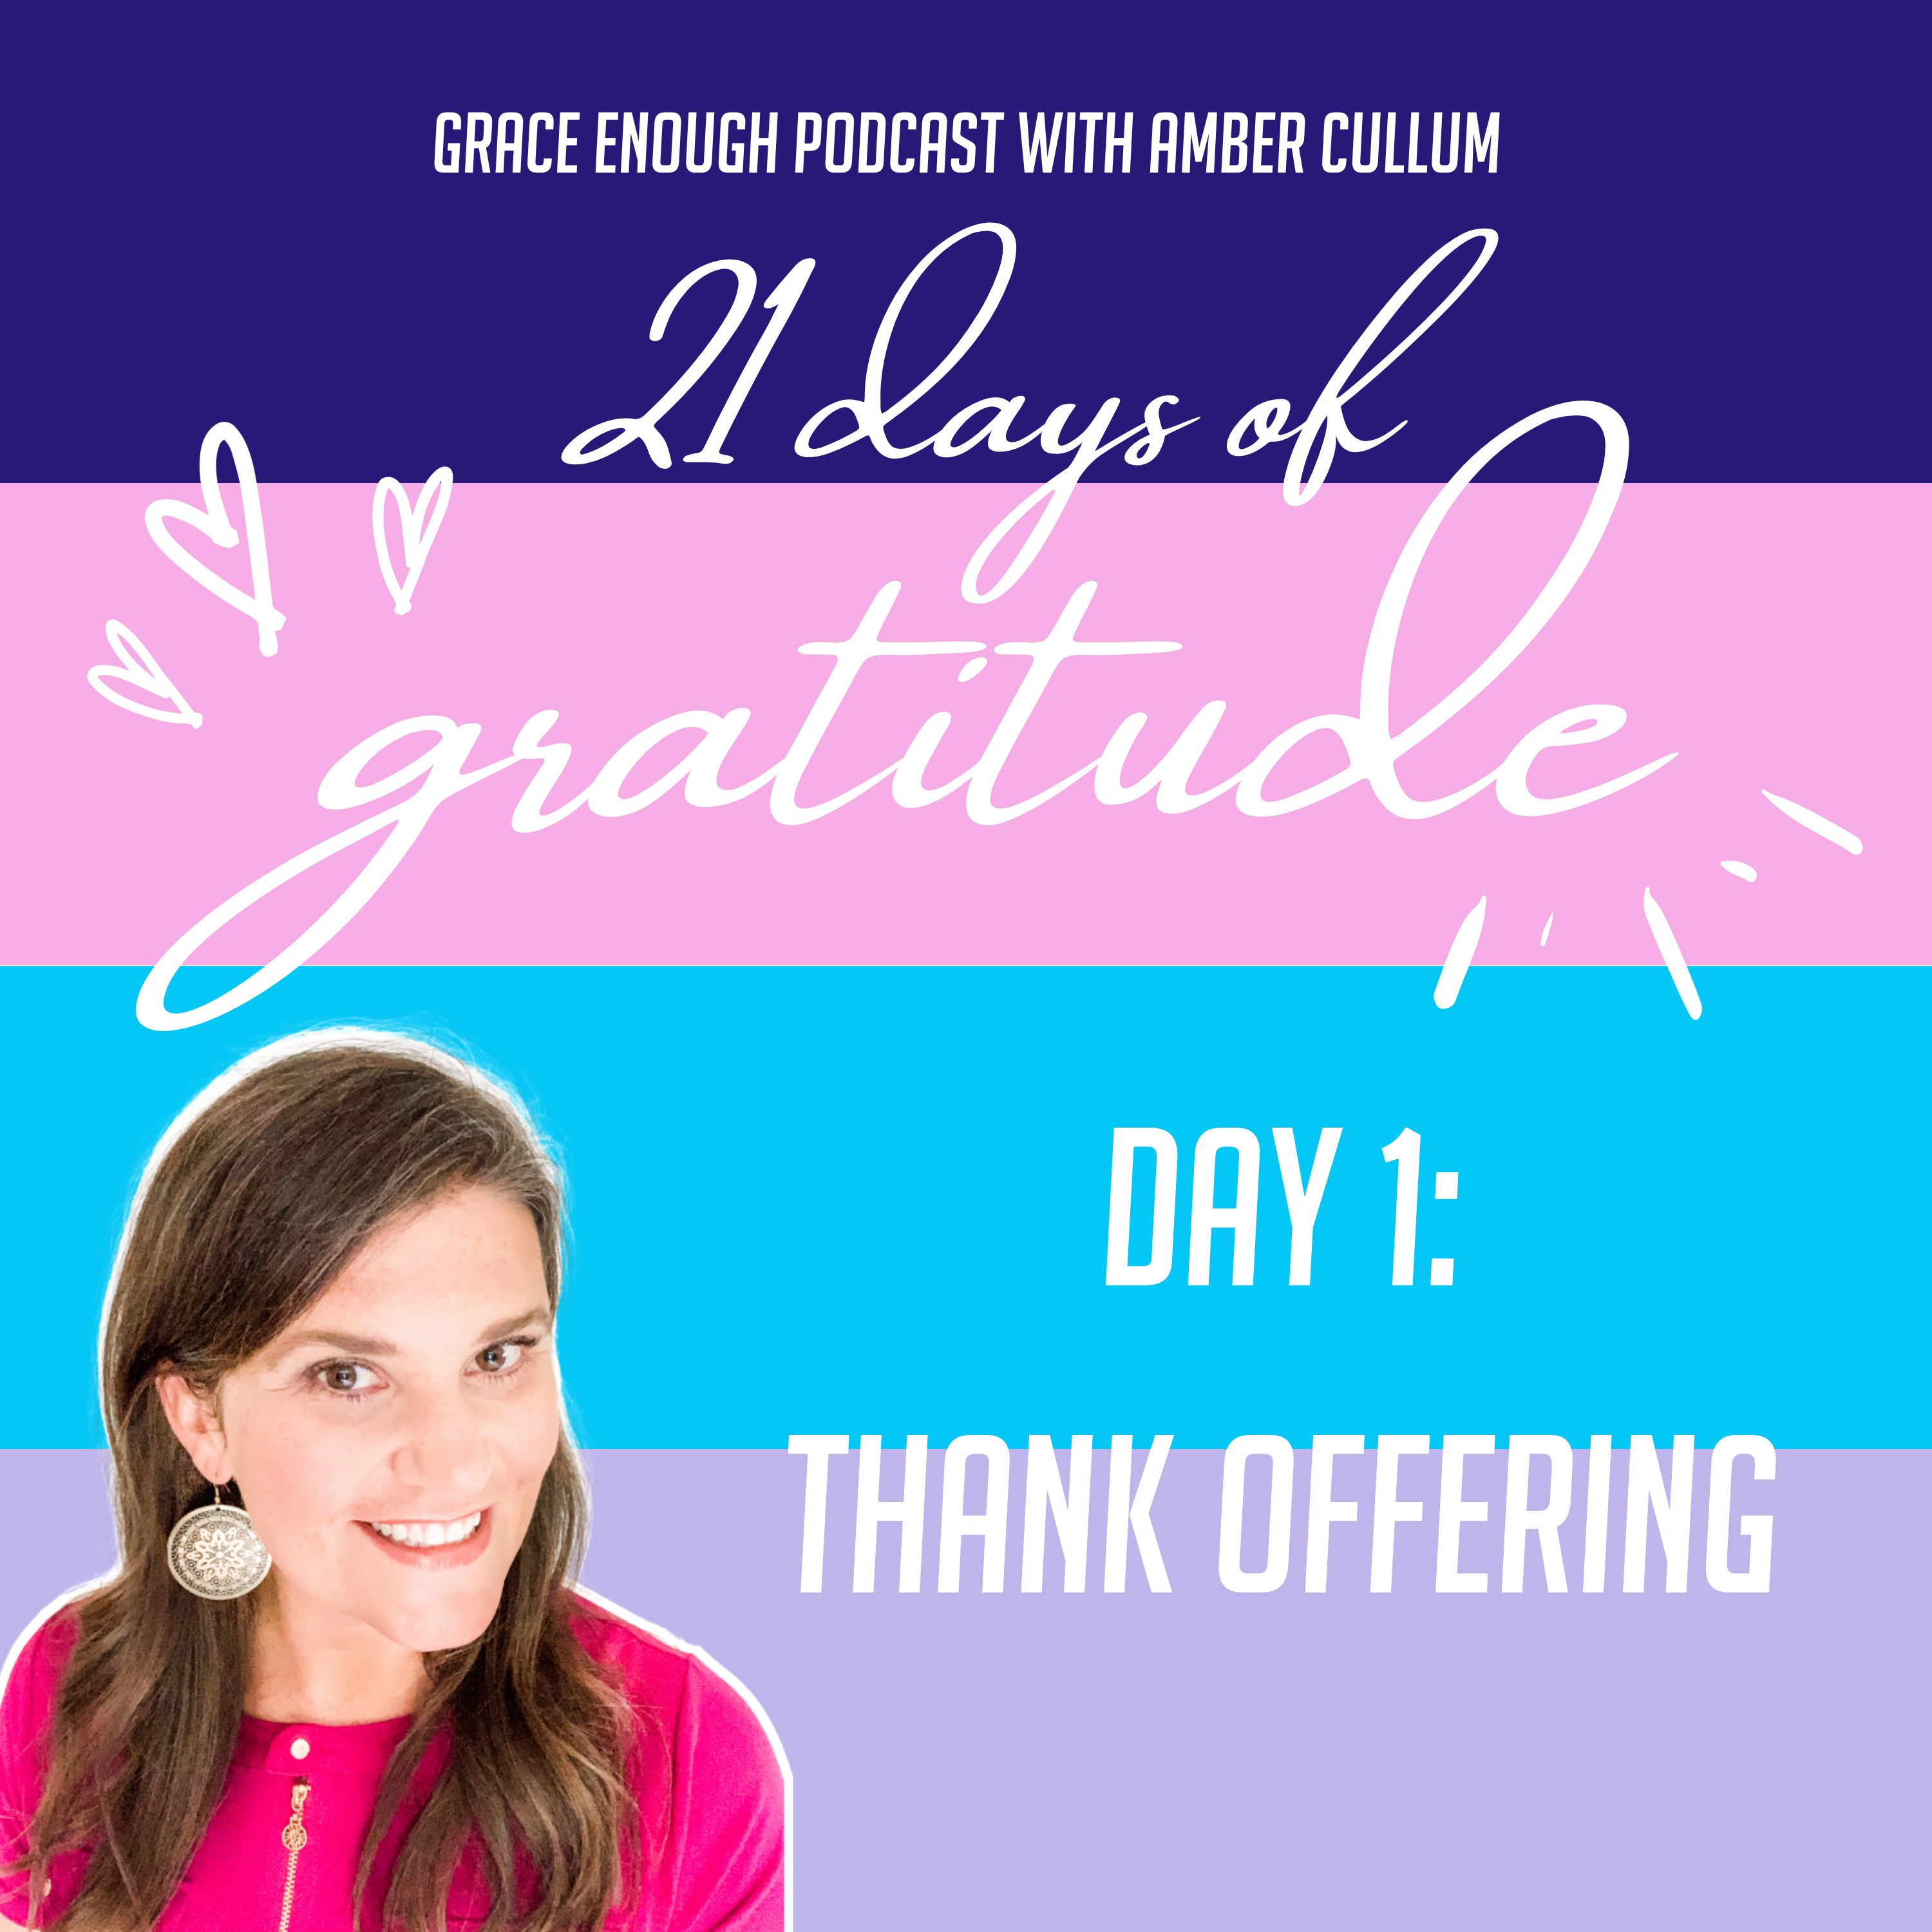 21 Days of Gratitude: Day 1, Thank Offering